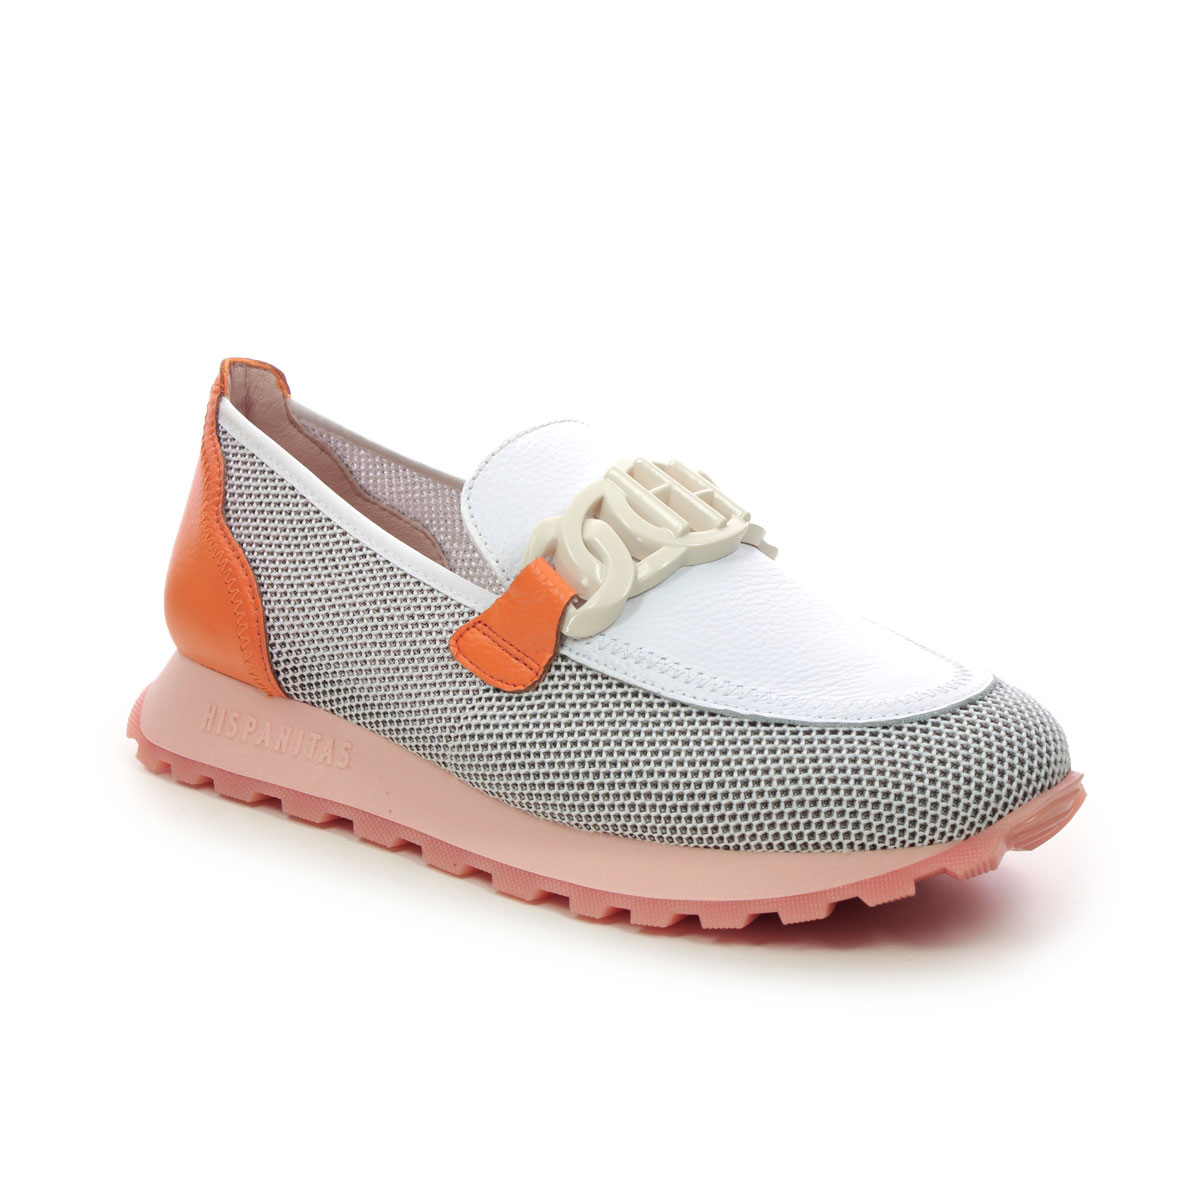 Hispanitas Loira Perf Loafer Orange multi Womens loafers HV243461-003 in a Plain Leather and Textile in Size 40